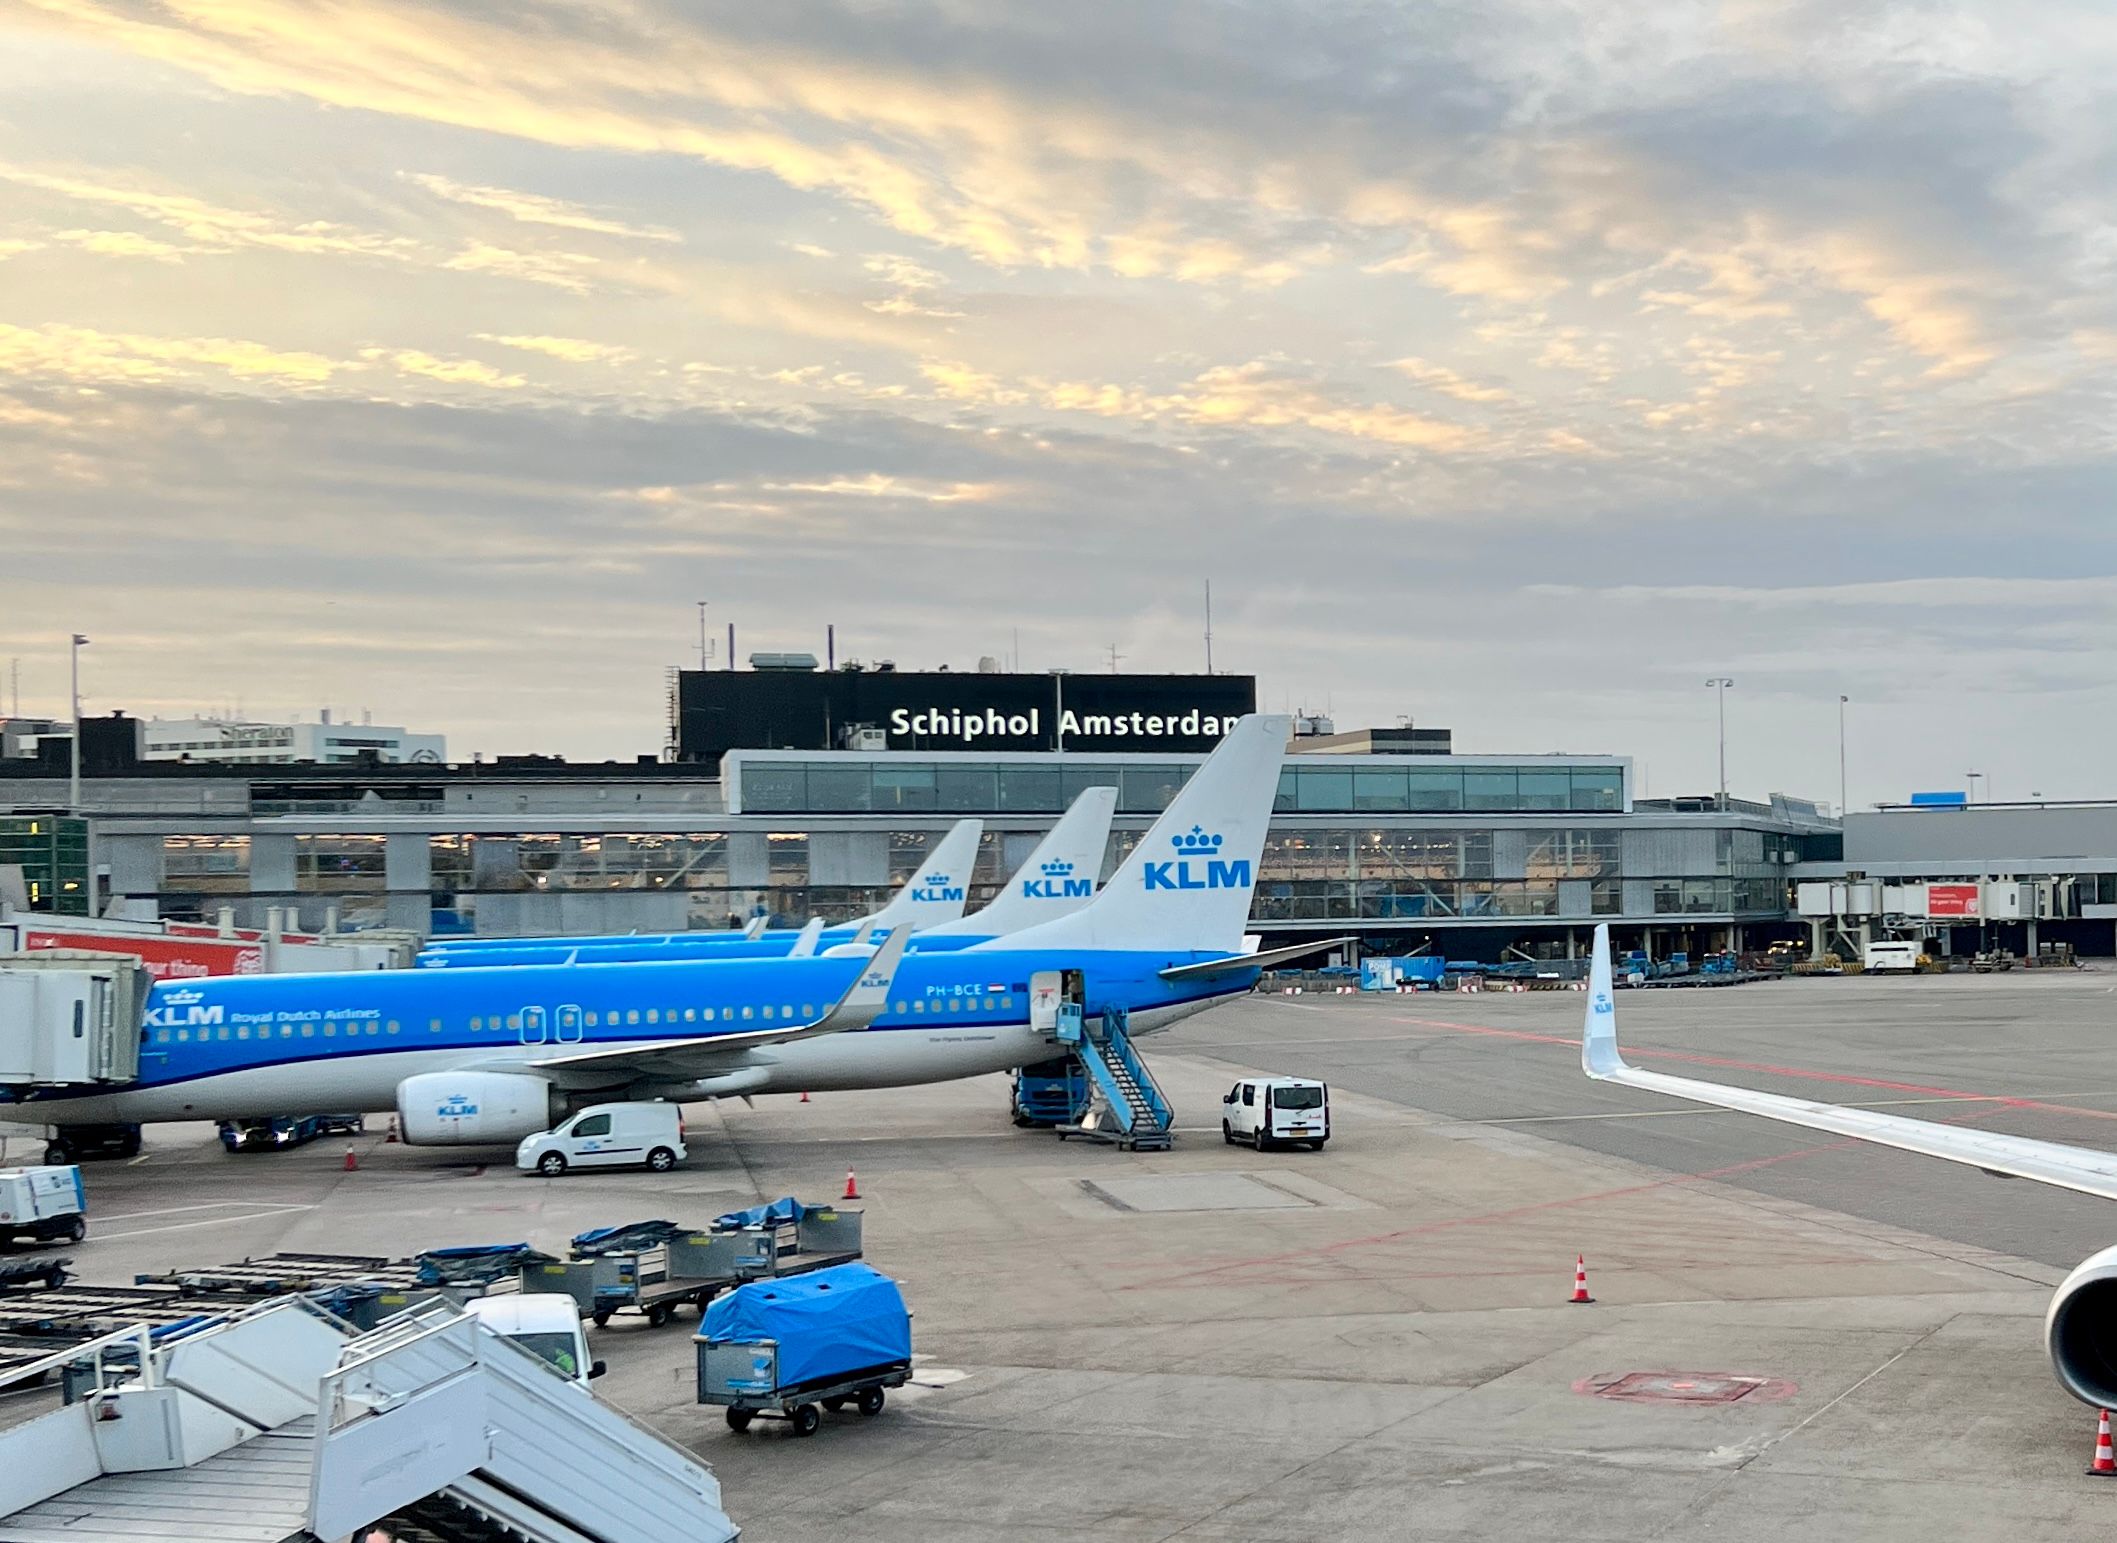 KLM planes at Amsterdam Schiphol Airport